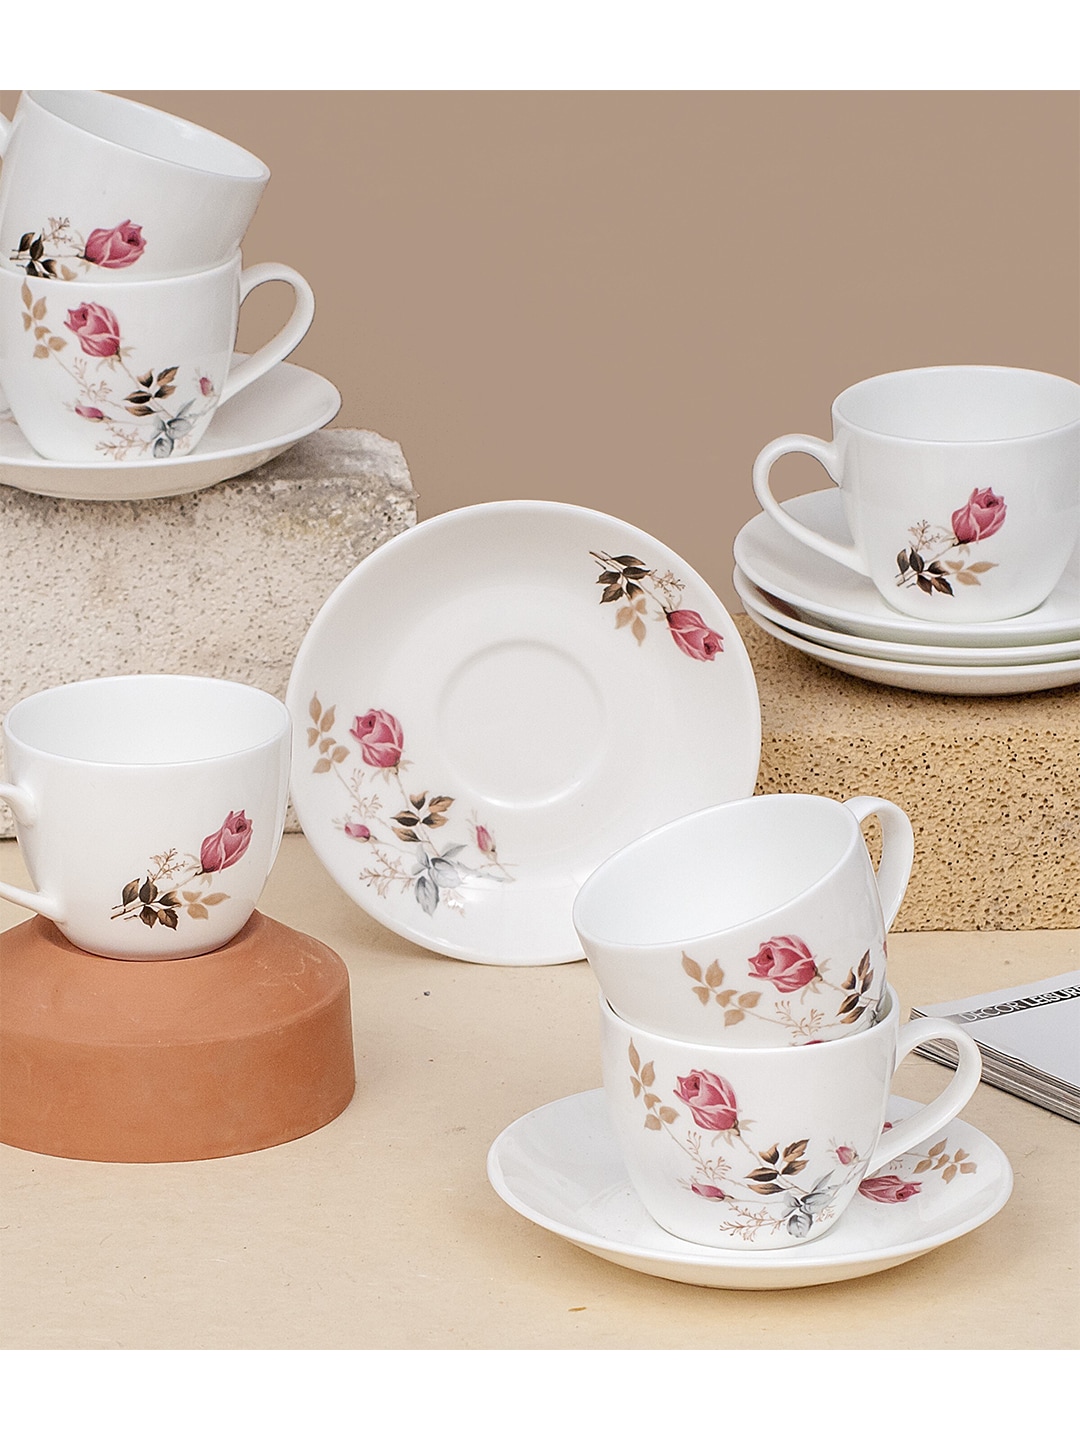 CLAY CRAFT Set of 12 White Floral Printed Ceramic Glossy Cups and Saucers Price in India